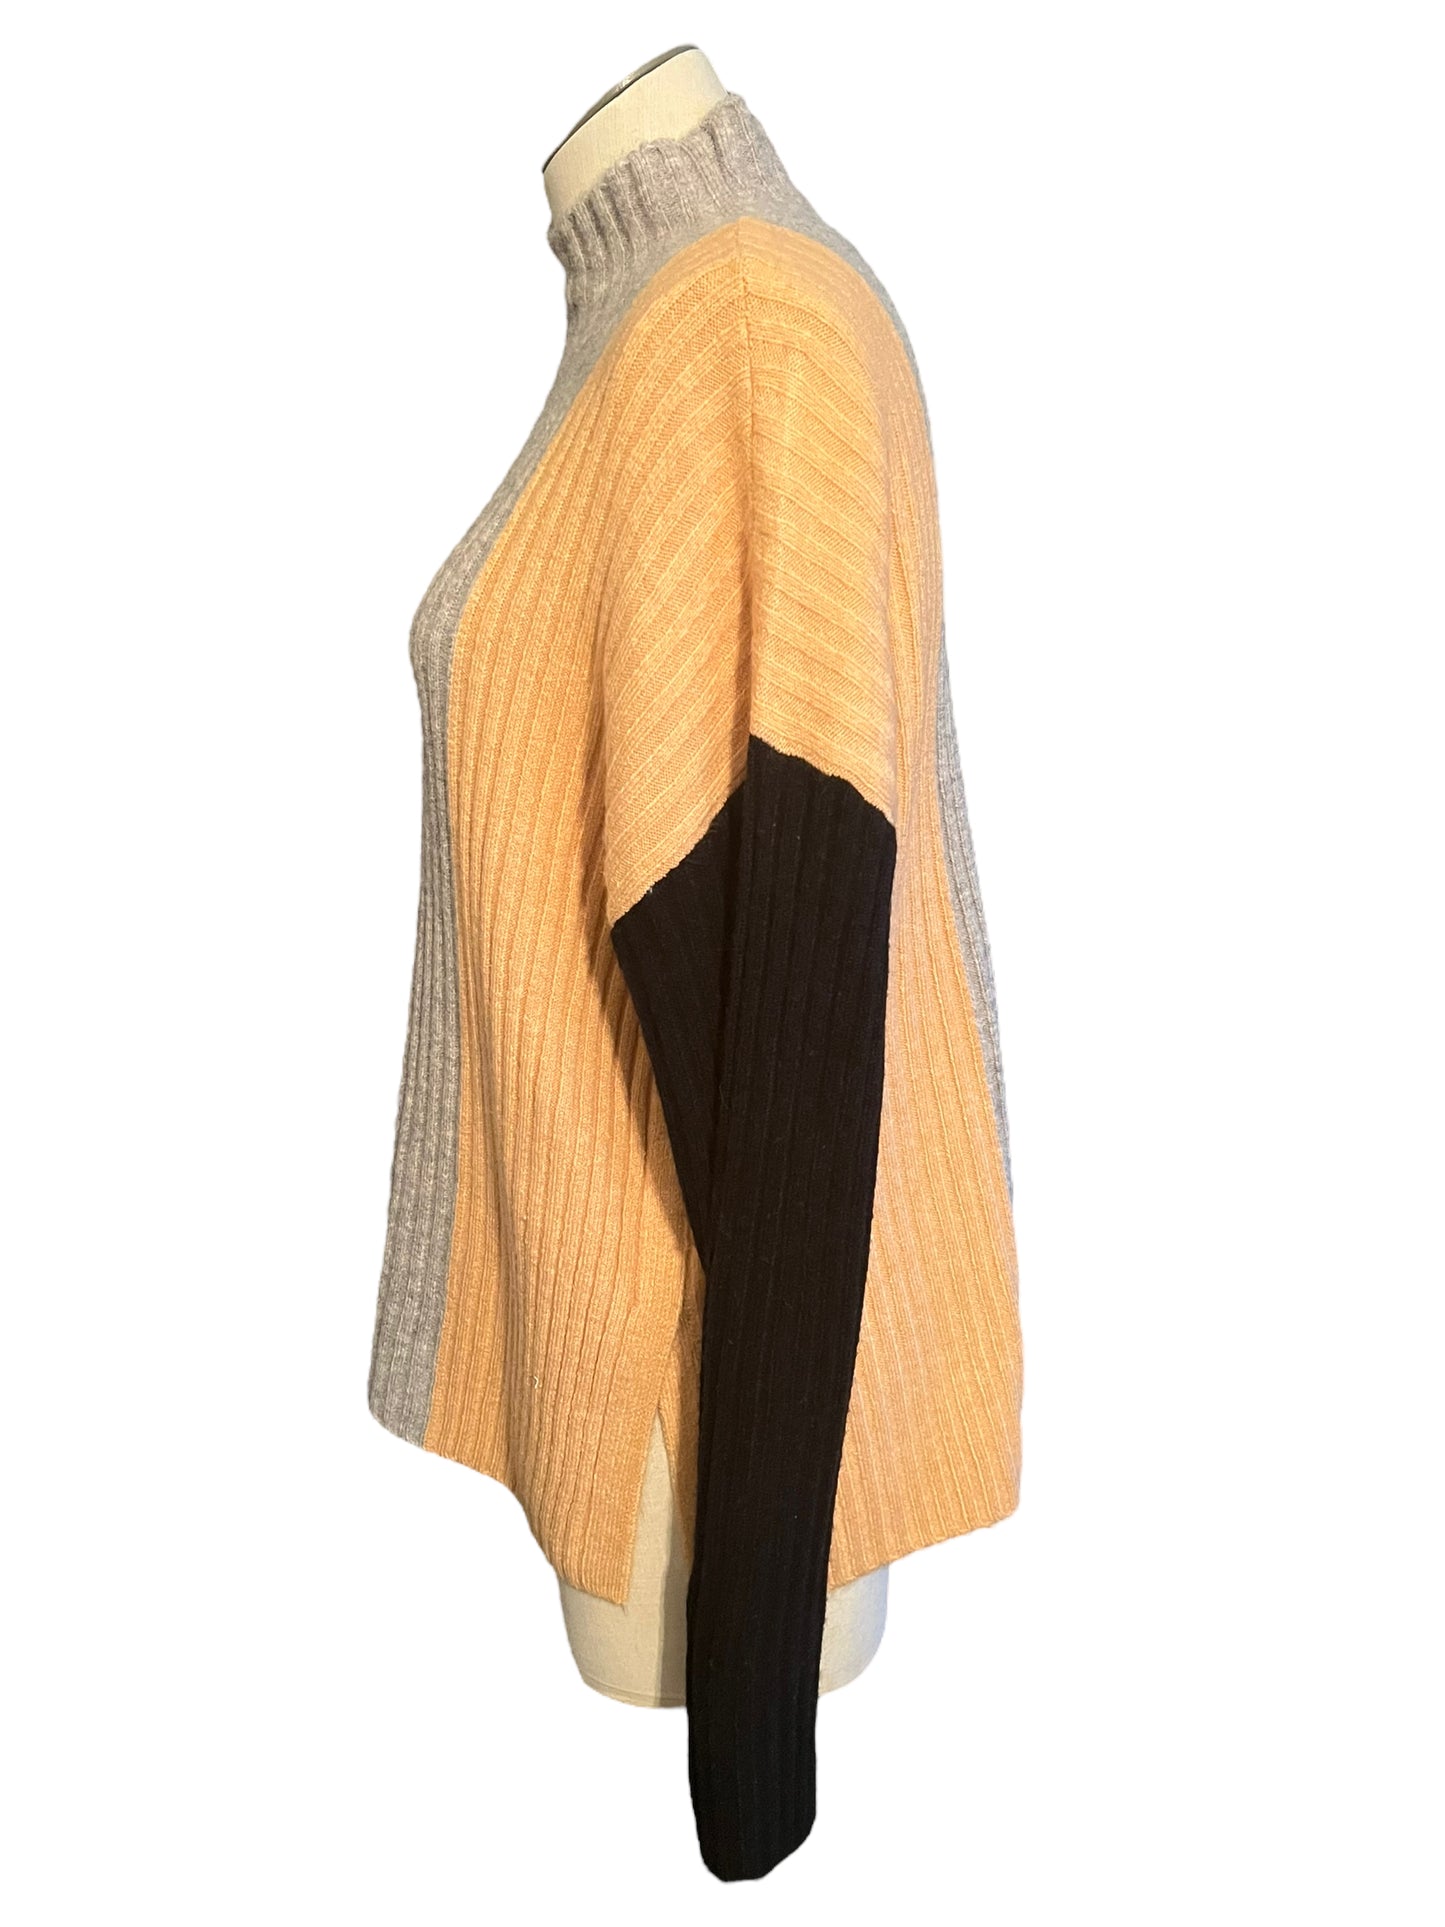 Calvin Klein Color Block Ribbed Mock Neck Size S Sweater